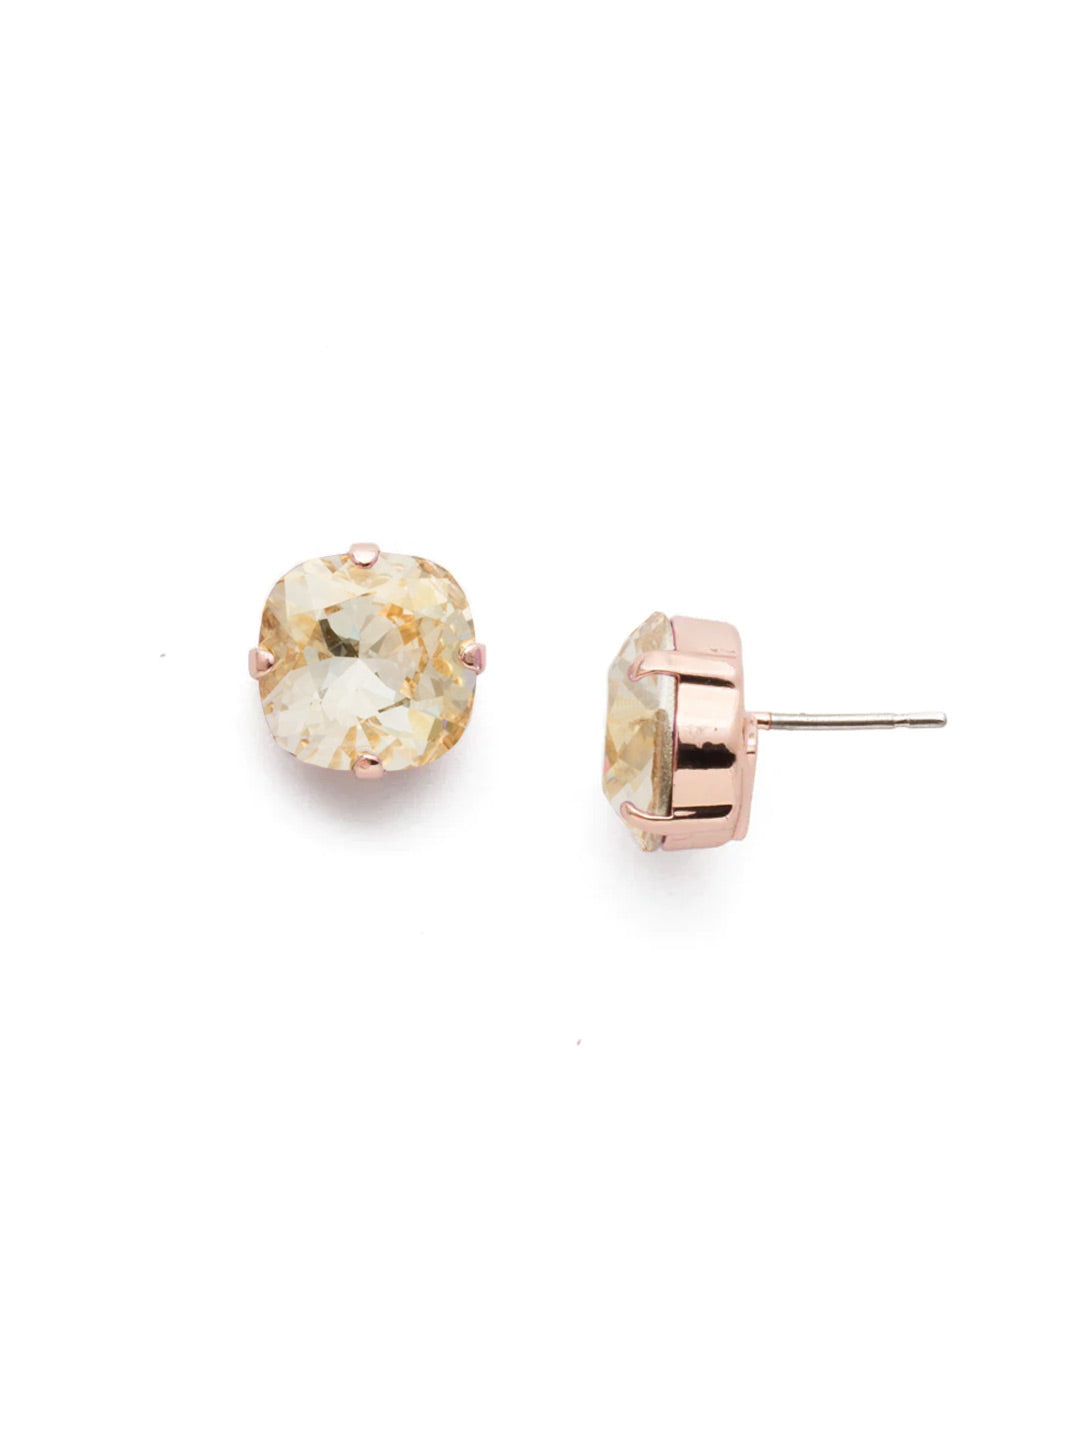 Halcyon Stud Earrings - EDH25RGCCH - <p>A beautiful, luminous cushion-cut crystal in a classic four-pronged setting that's ideal for everyday wear. From Sorrelli's Crystal Champagne collection in our Rose Gold-tone finish.</p>